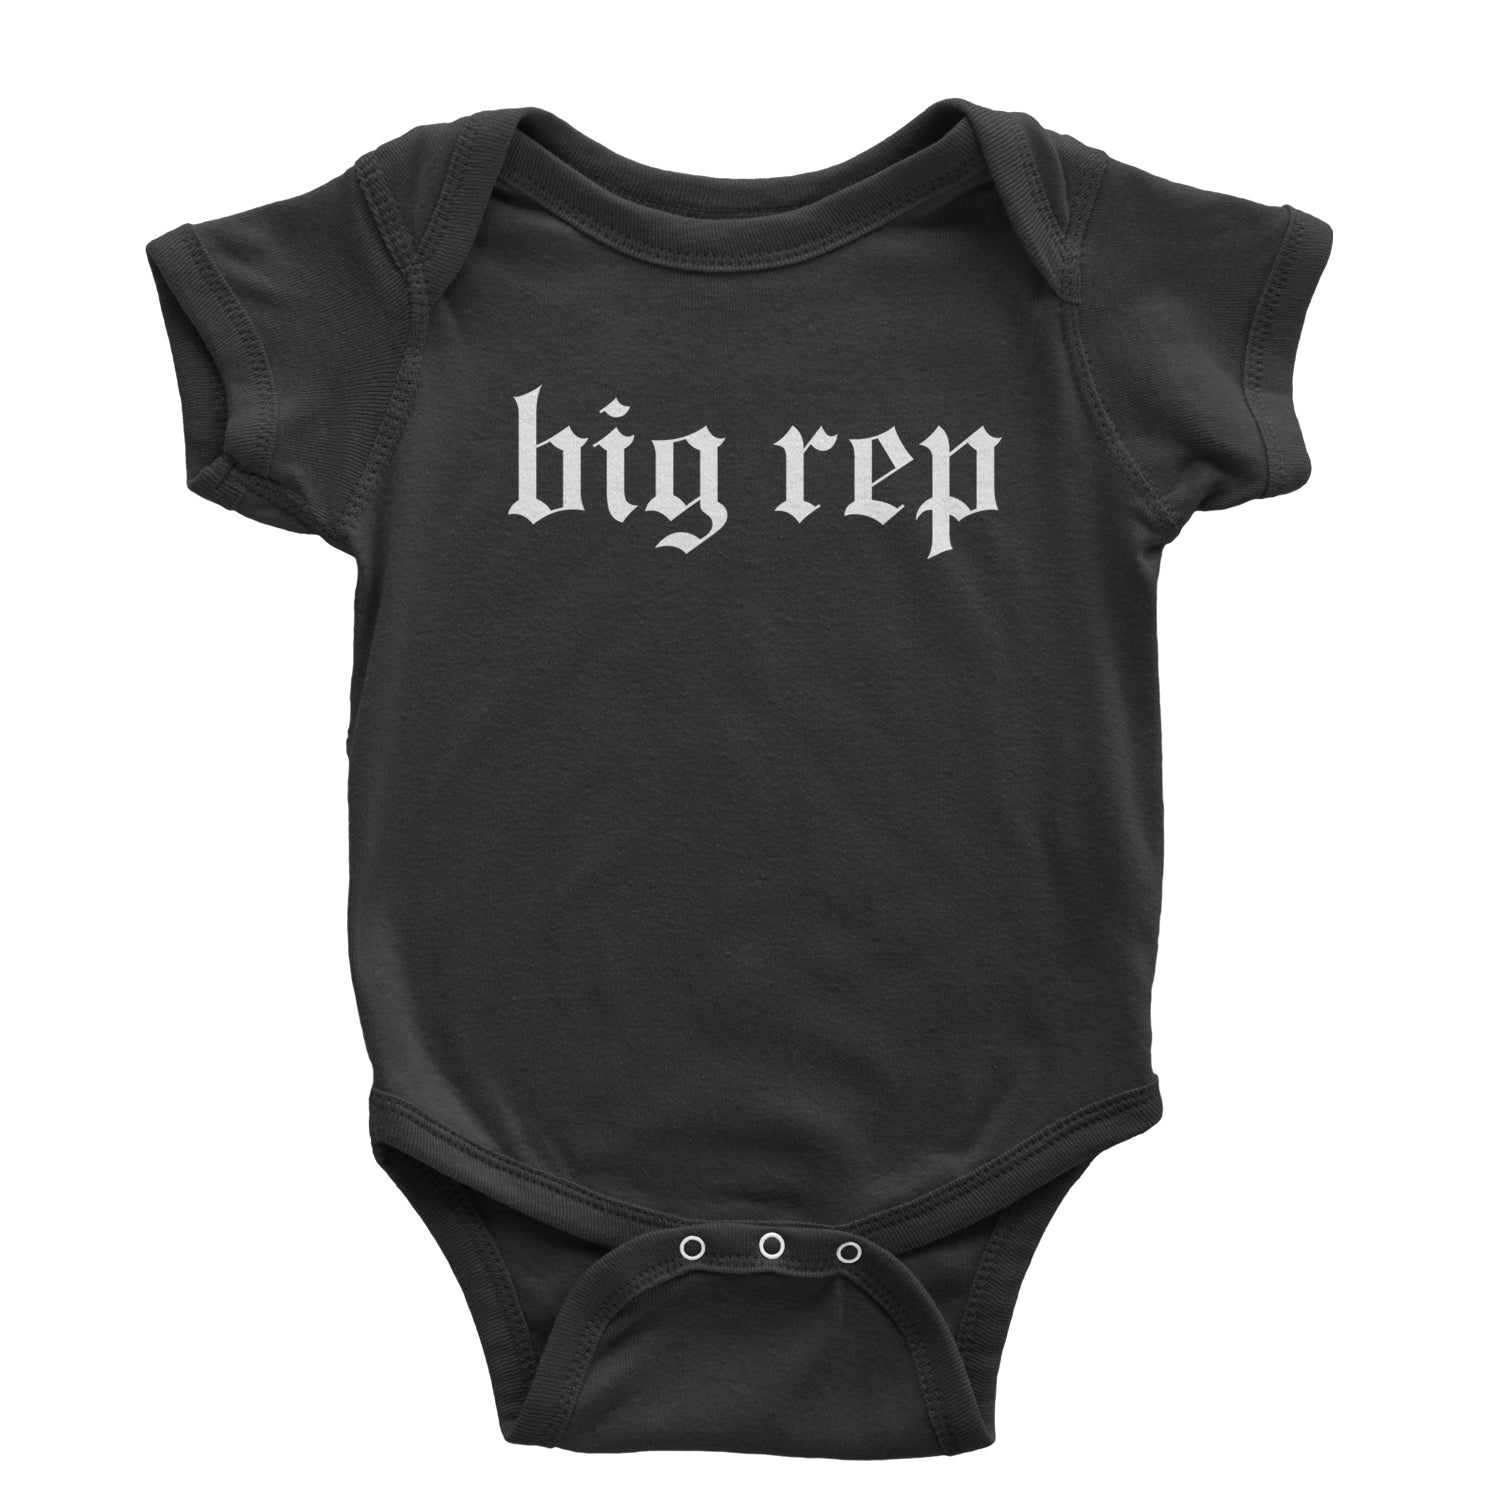 Big Rep Reputation Infant One-Piece Romper Bodysuit and Toddler T-shirt